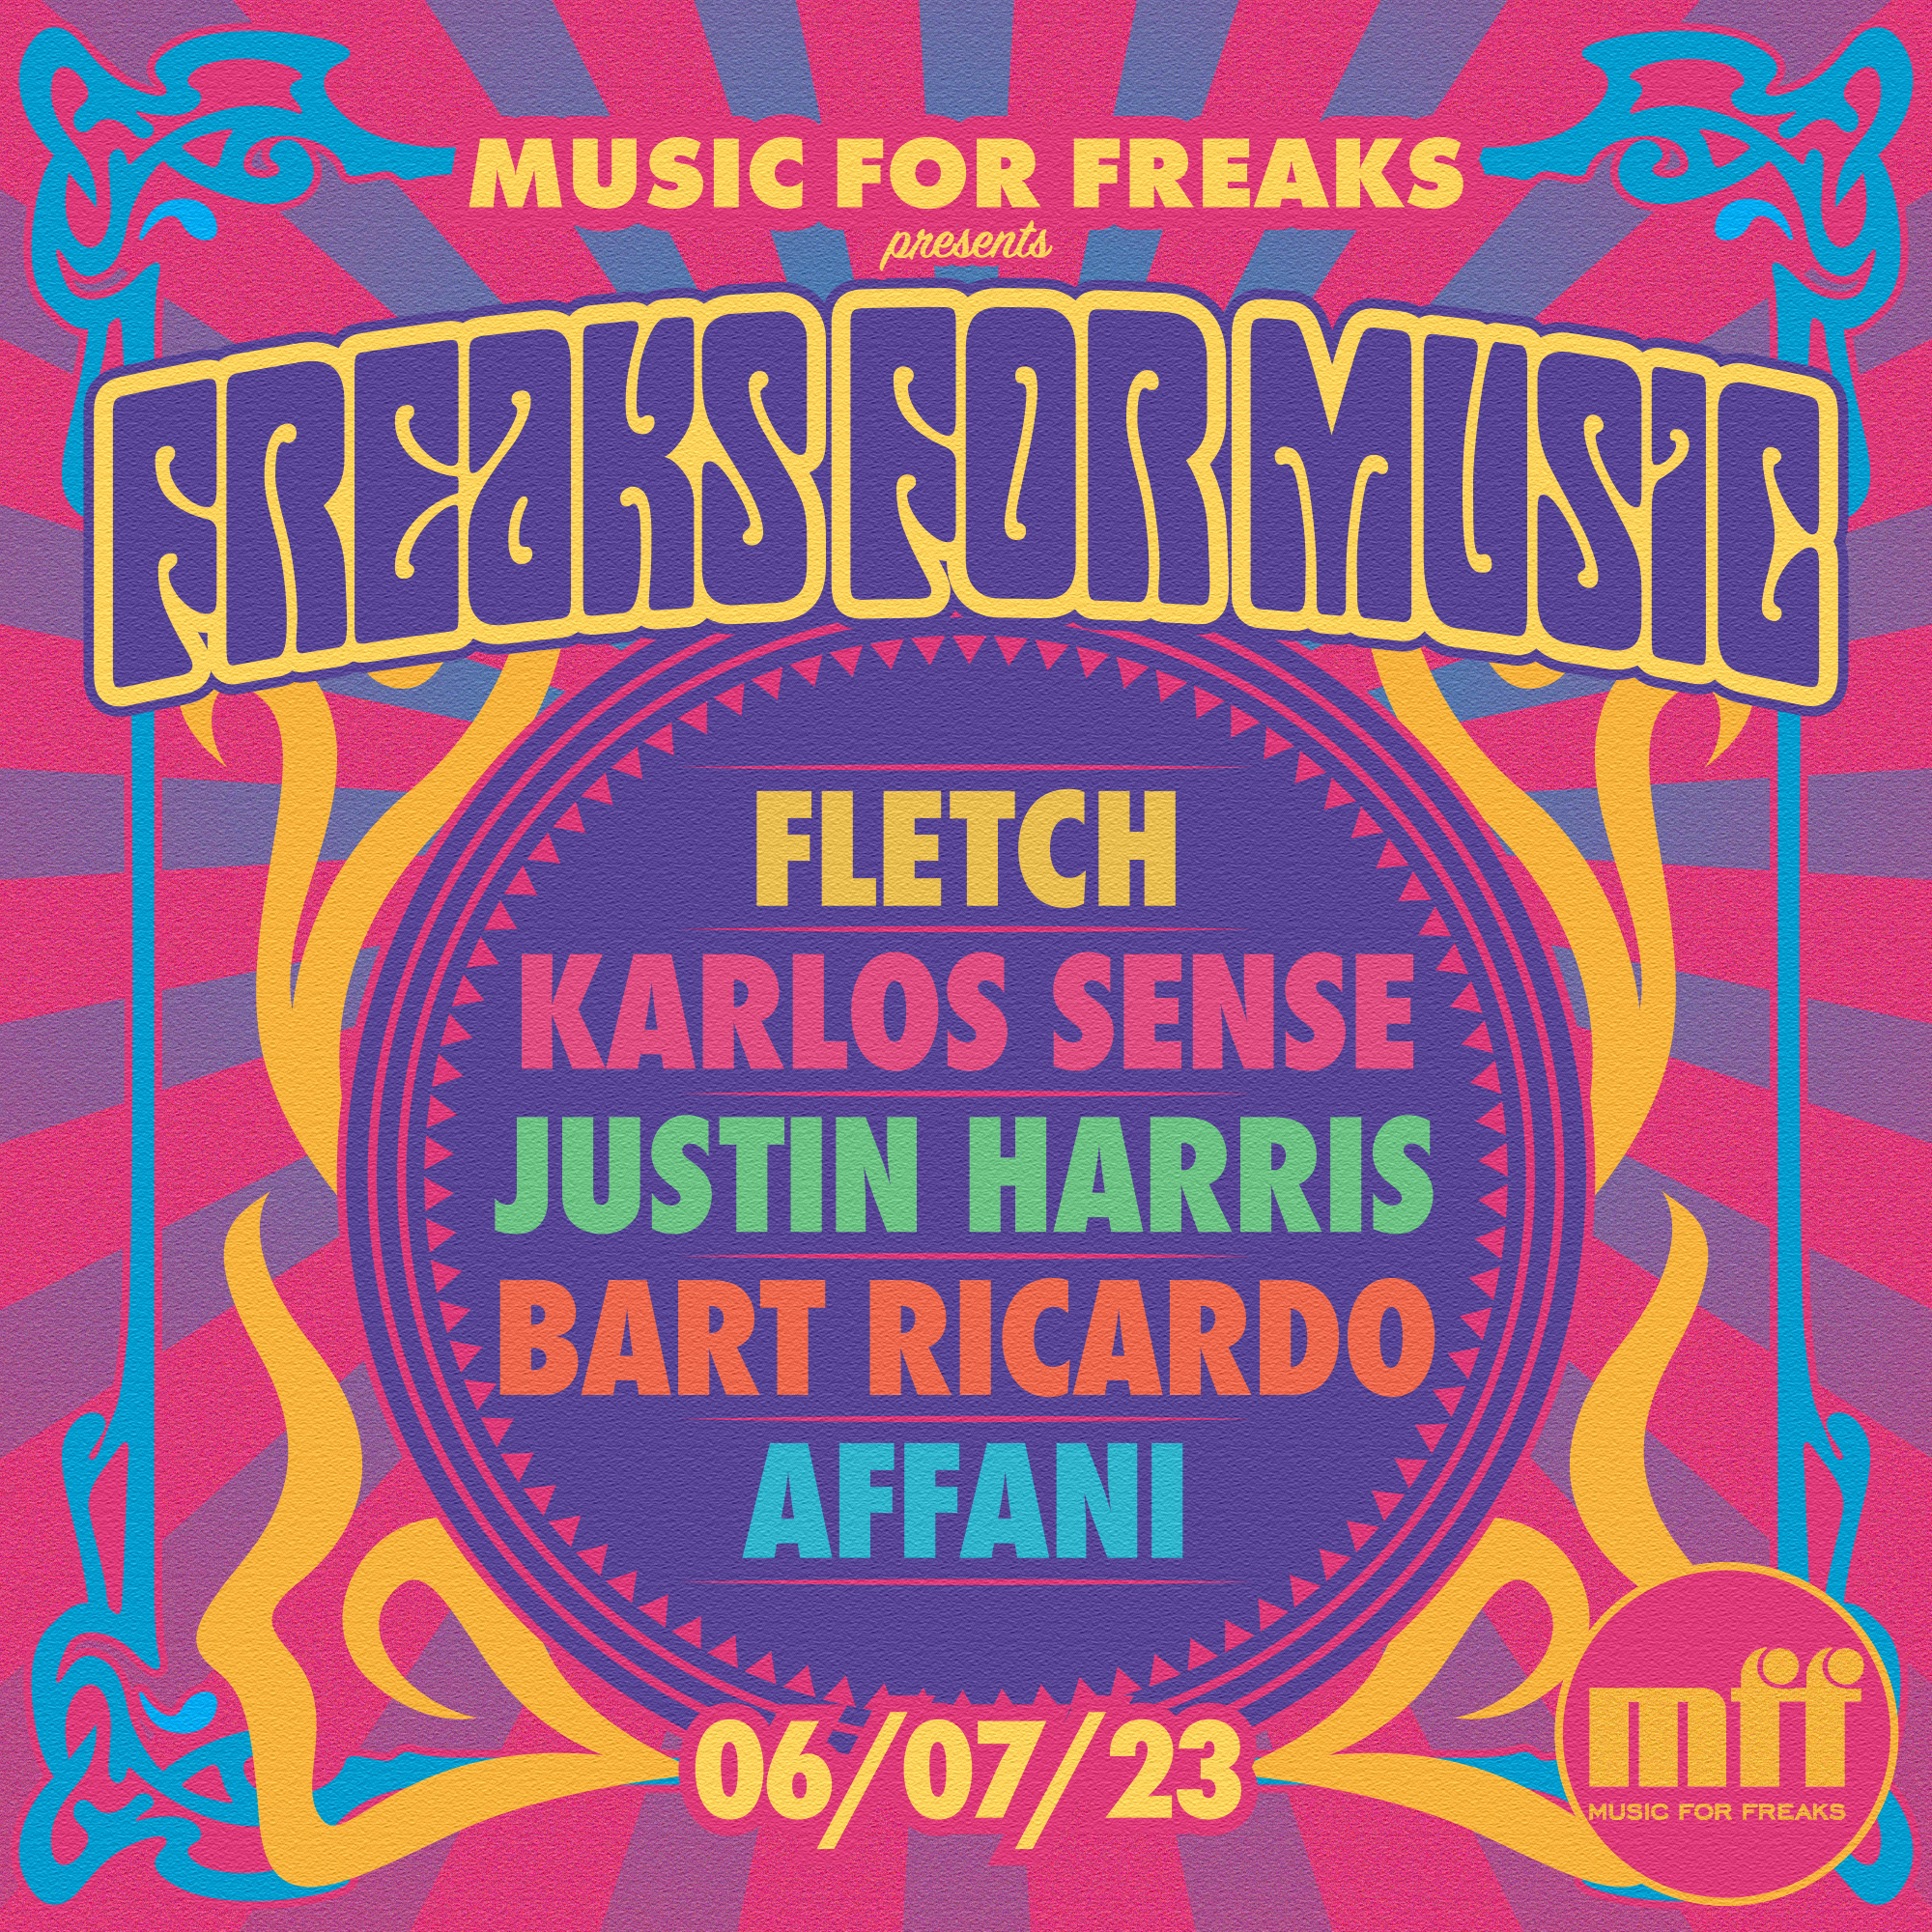 Freaks For Music at Pikes